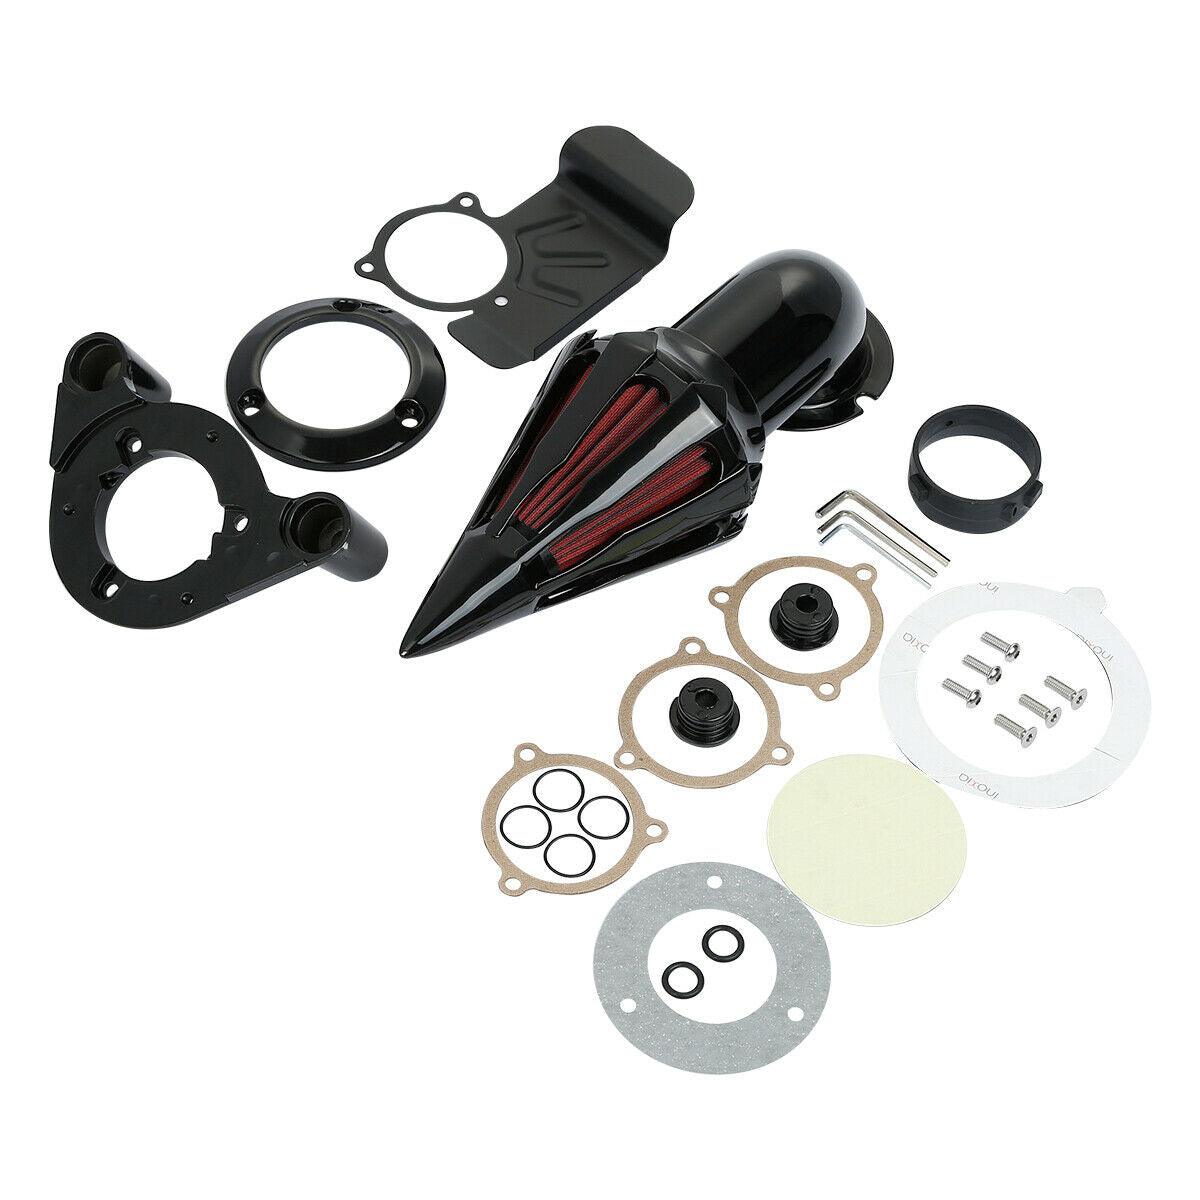 Black Air Cleaner Kit Intake Filter Fit For Harley Touring Electra Glide 08-12 - Moto Life Products